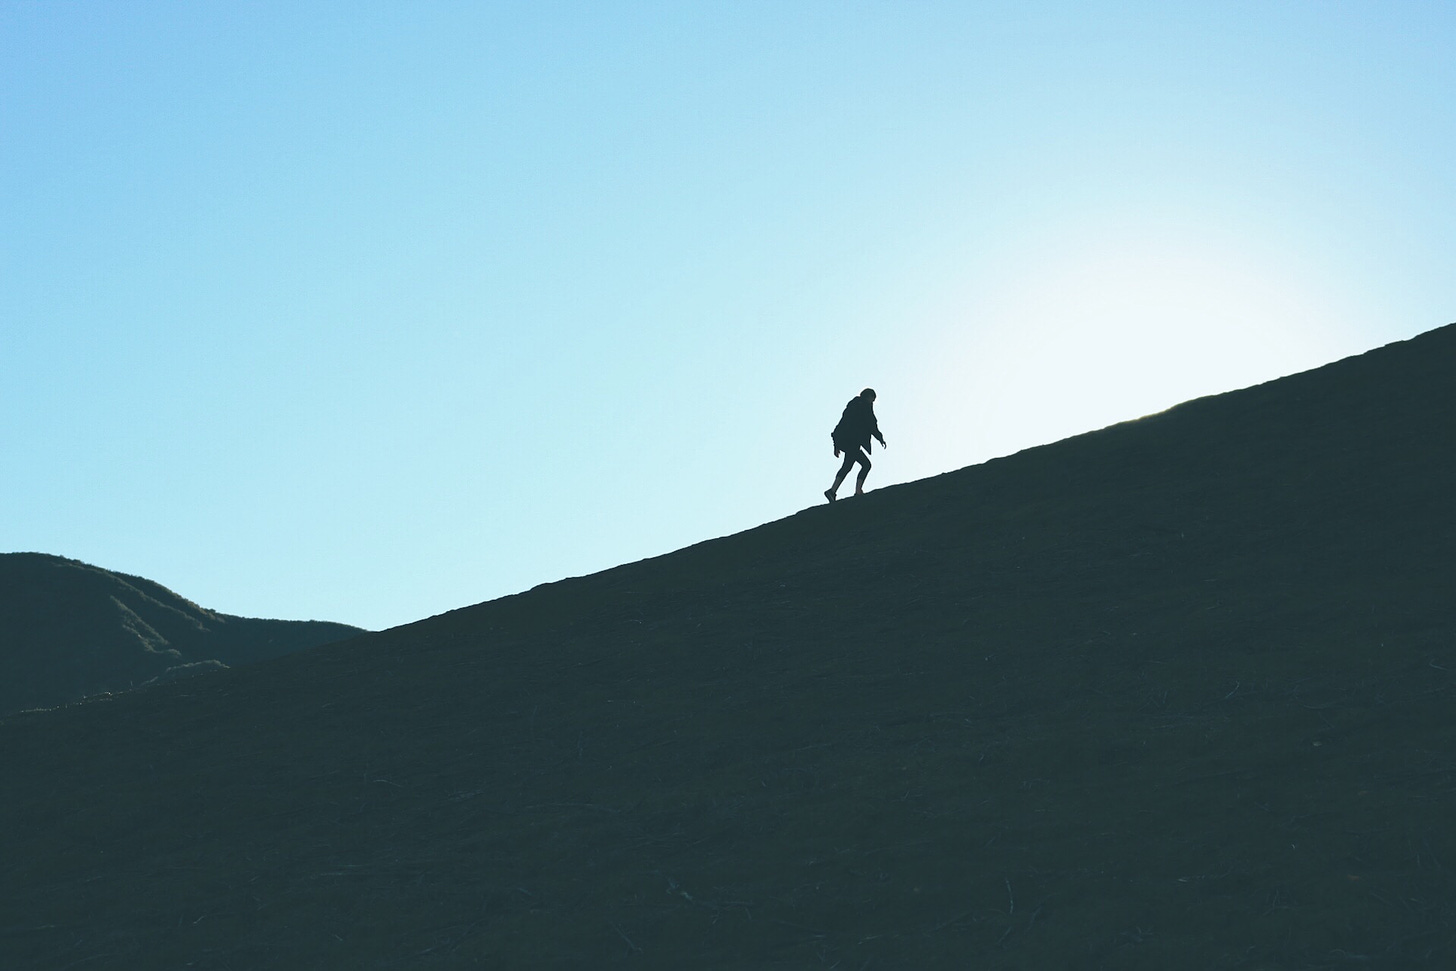 A person, shown from the side, climbs a mountain. The sky is bright behind them so they're shown in silhouette.